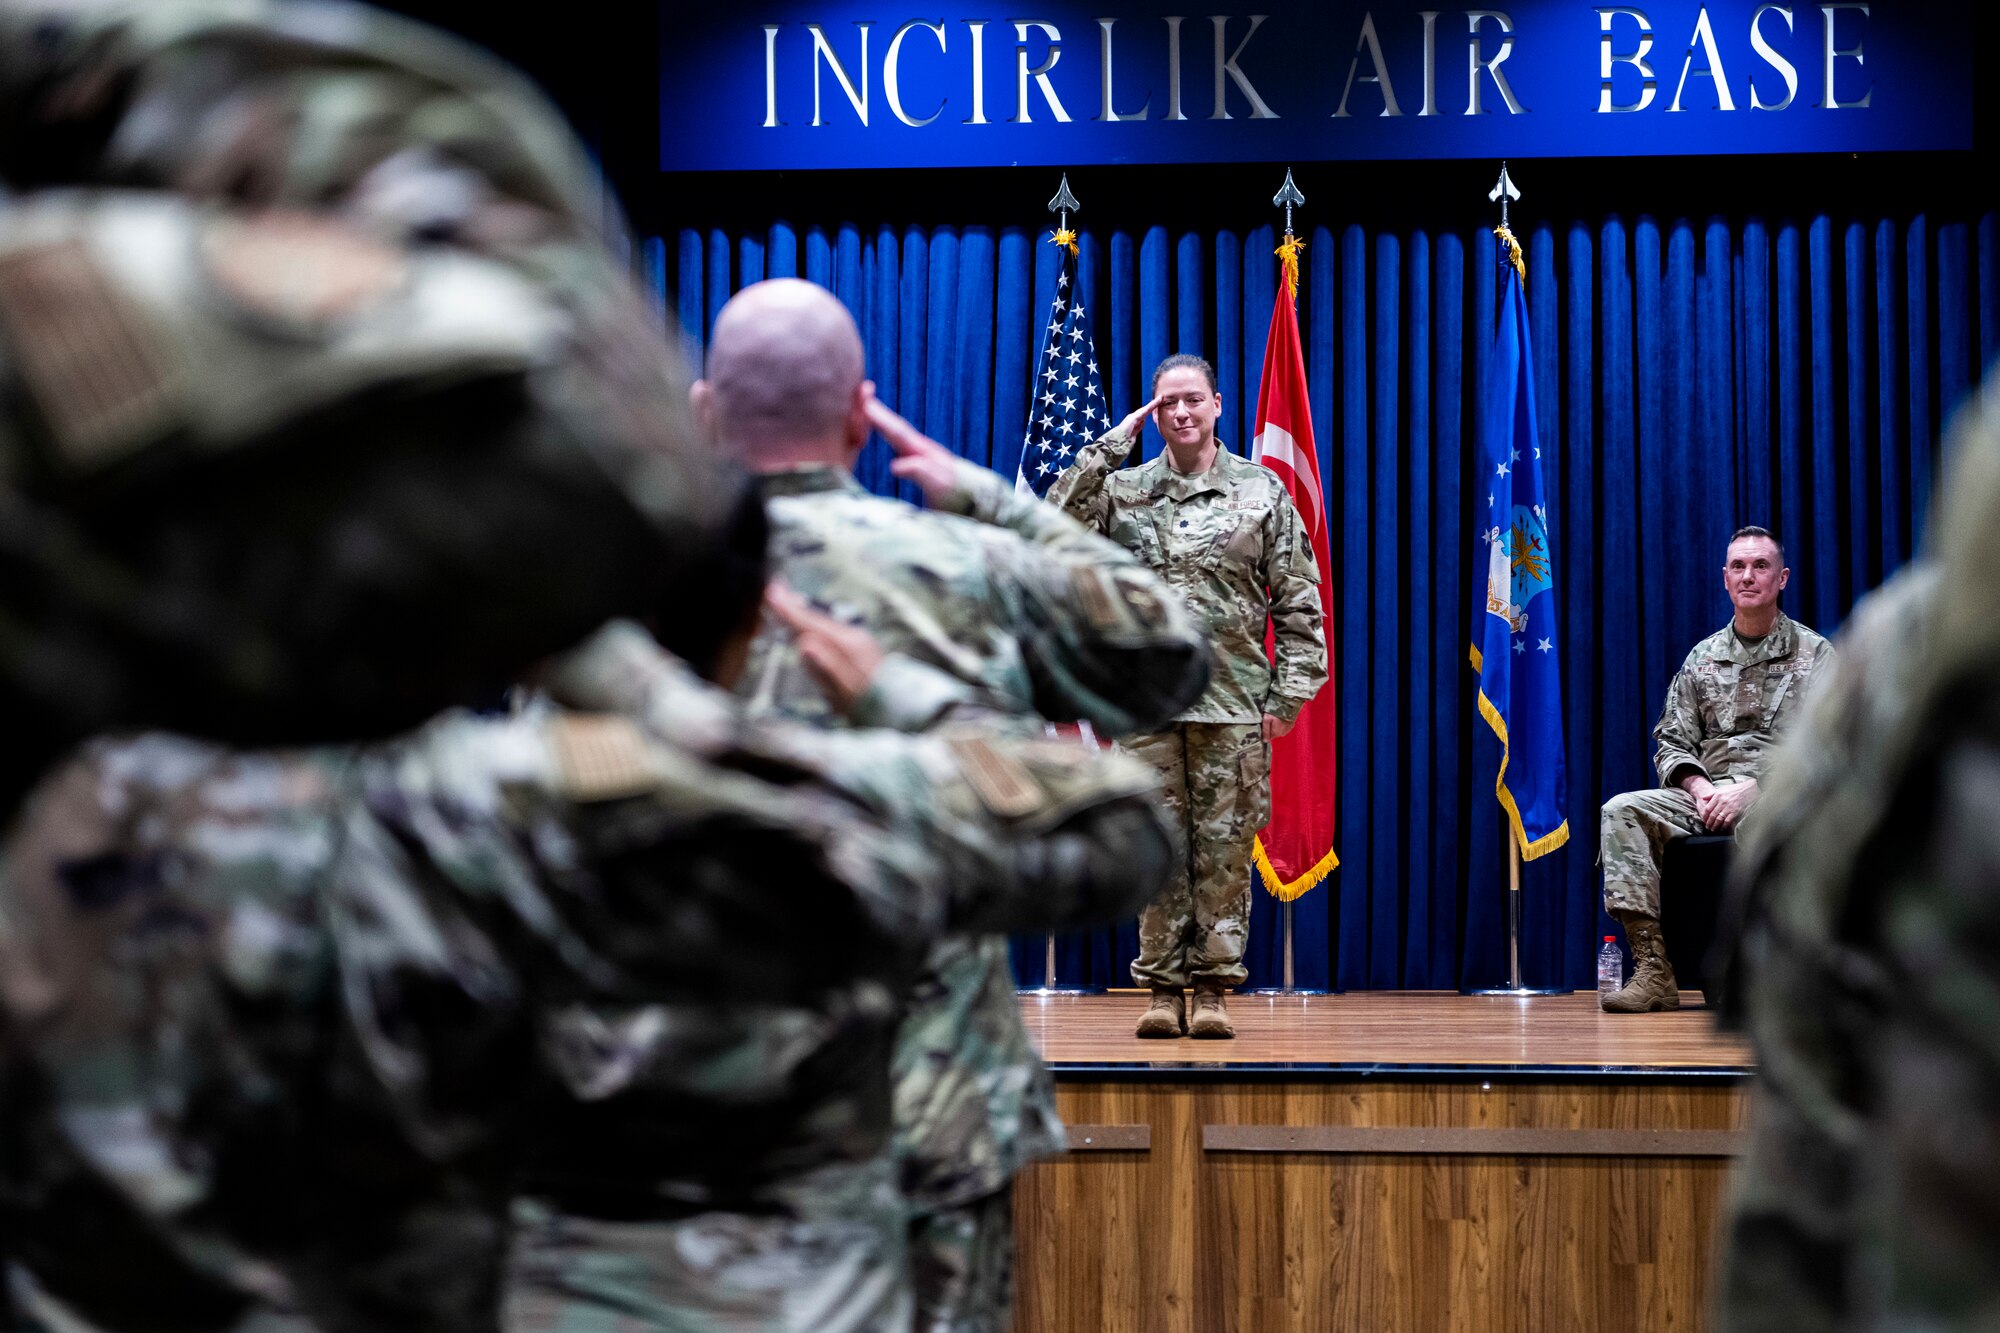 During the ceremony, Col. Christopher Kelly relinquished command to Col. Bradley Weast, 39th Medical Group commander, who then charged Lt. Col. Melissa Tennant with leading the squadron. The change of command ceremony is a long-standing military tradition that represents the formal transfer of responsibility from one officer to another.